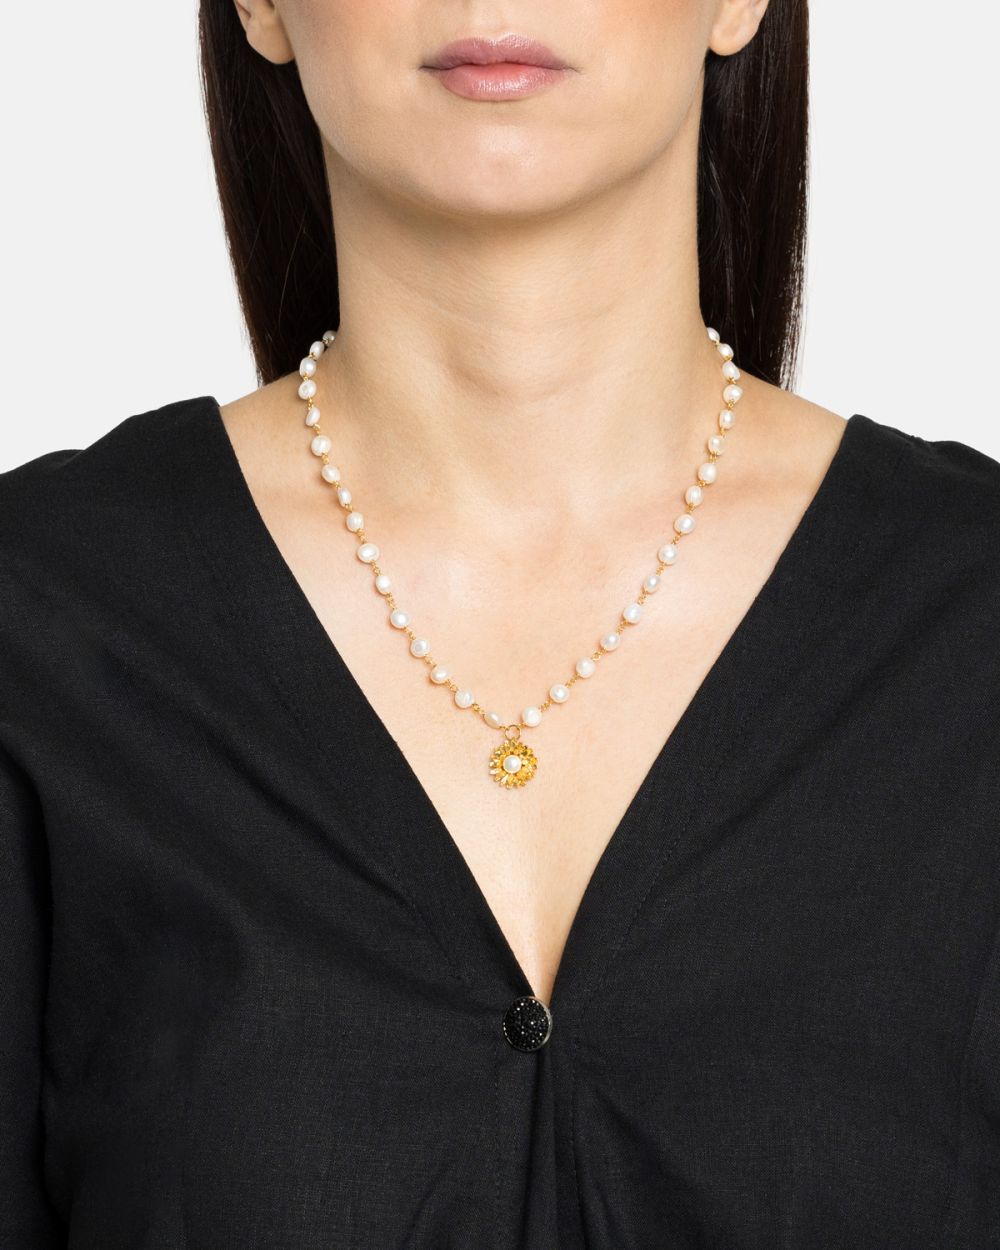 Alma Necklace in Gold Plated Silver with Pearls